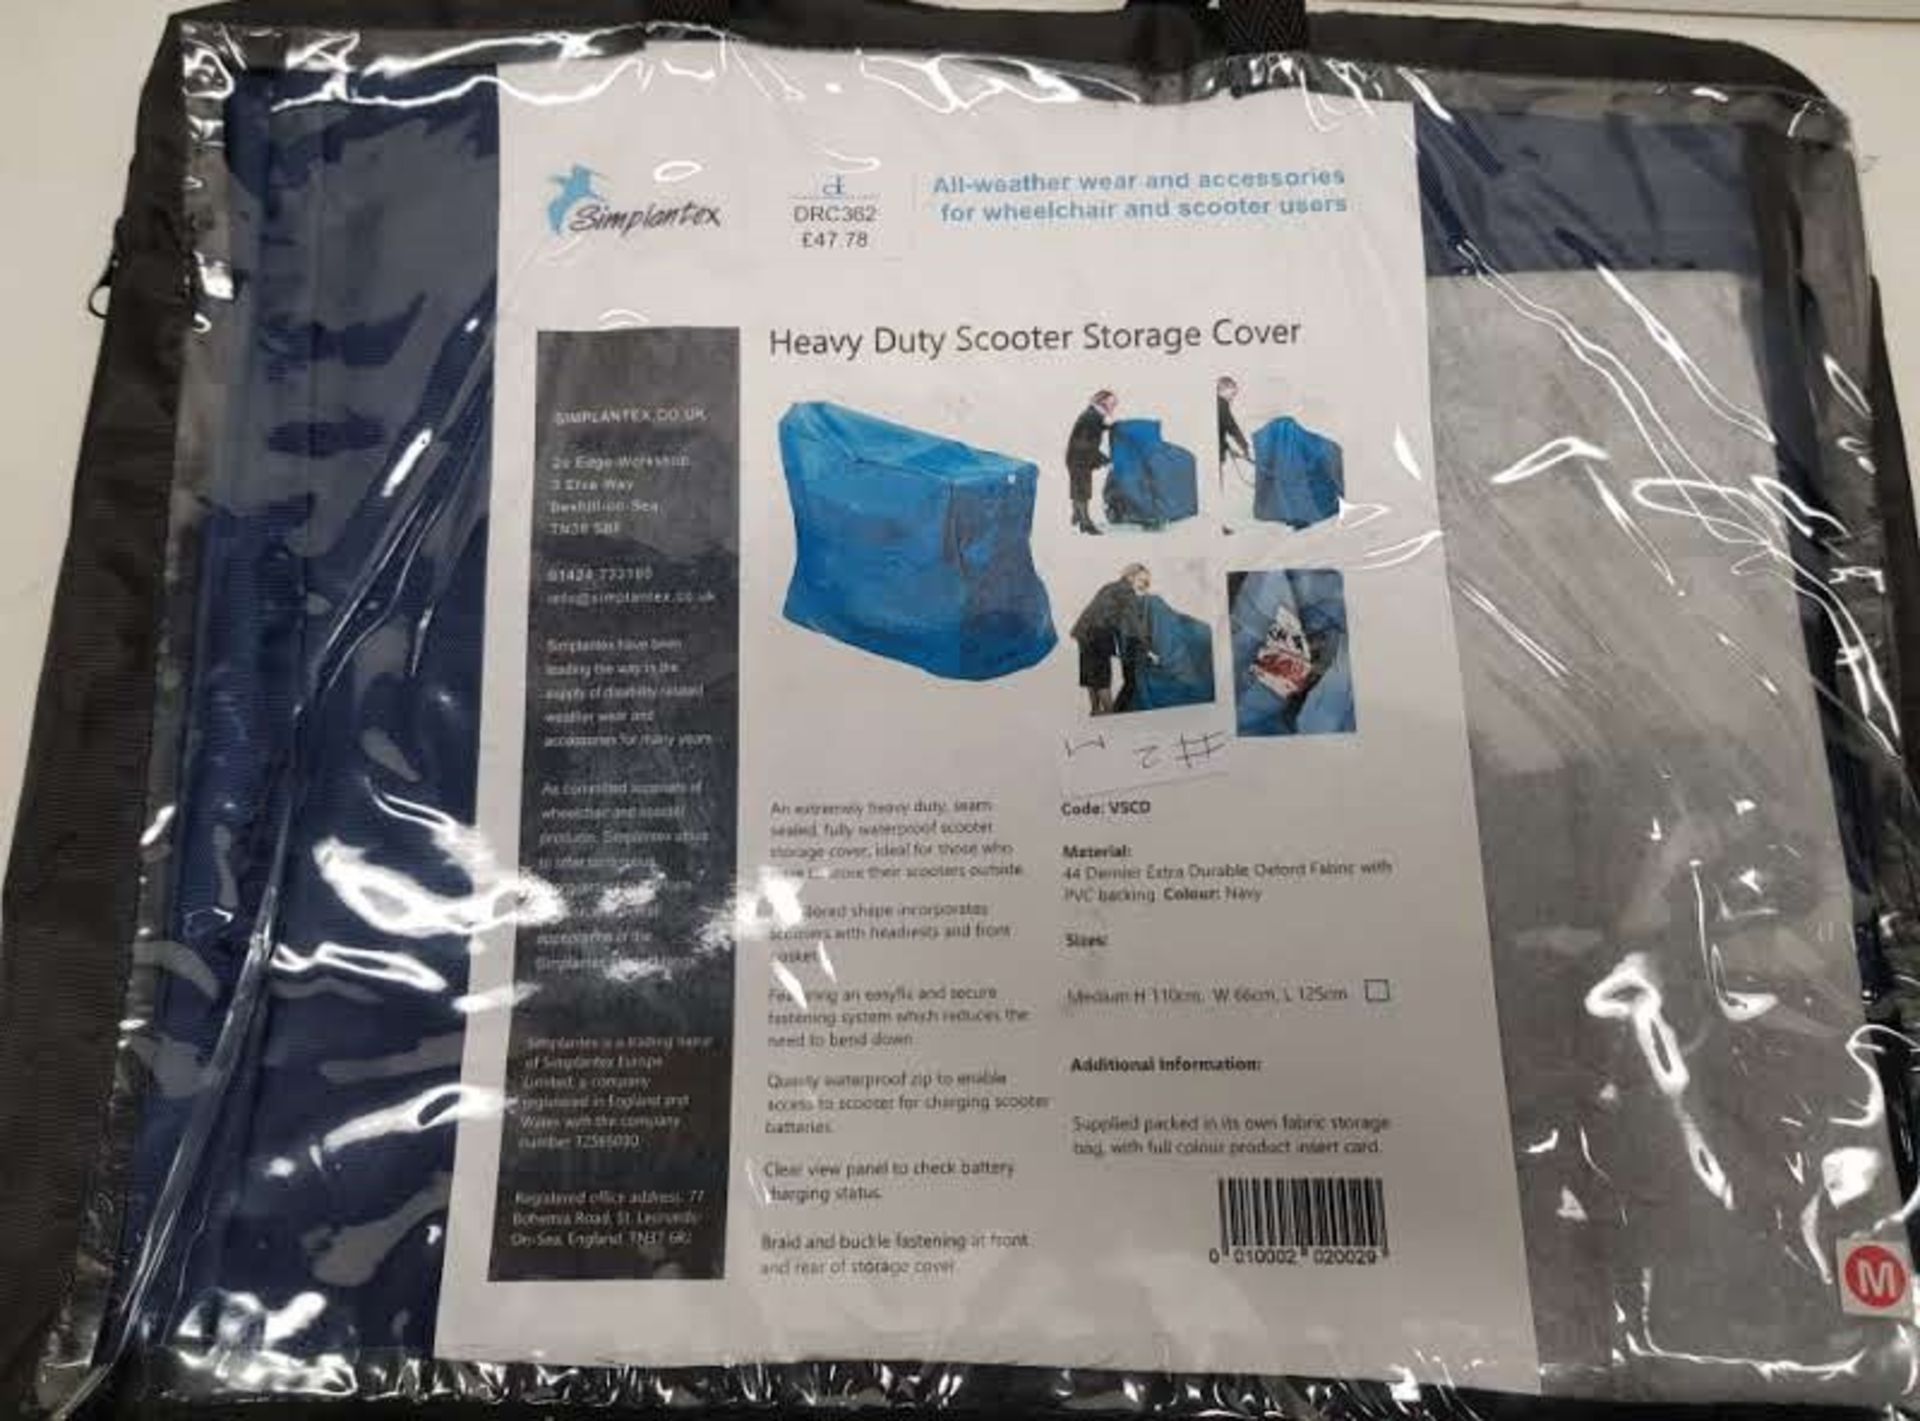 2x Heavy Duty Scooter Storage Covers - Image 2 of 2